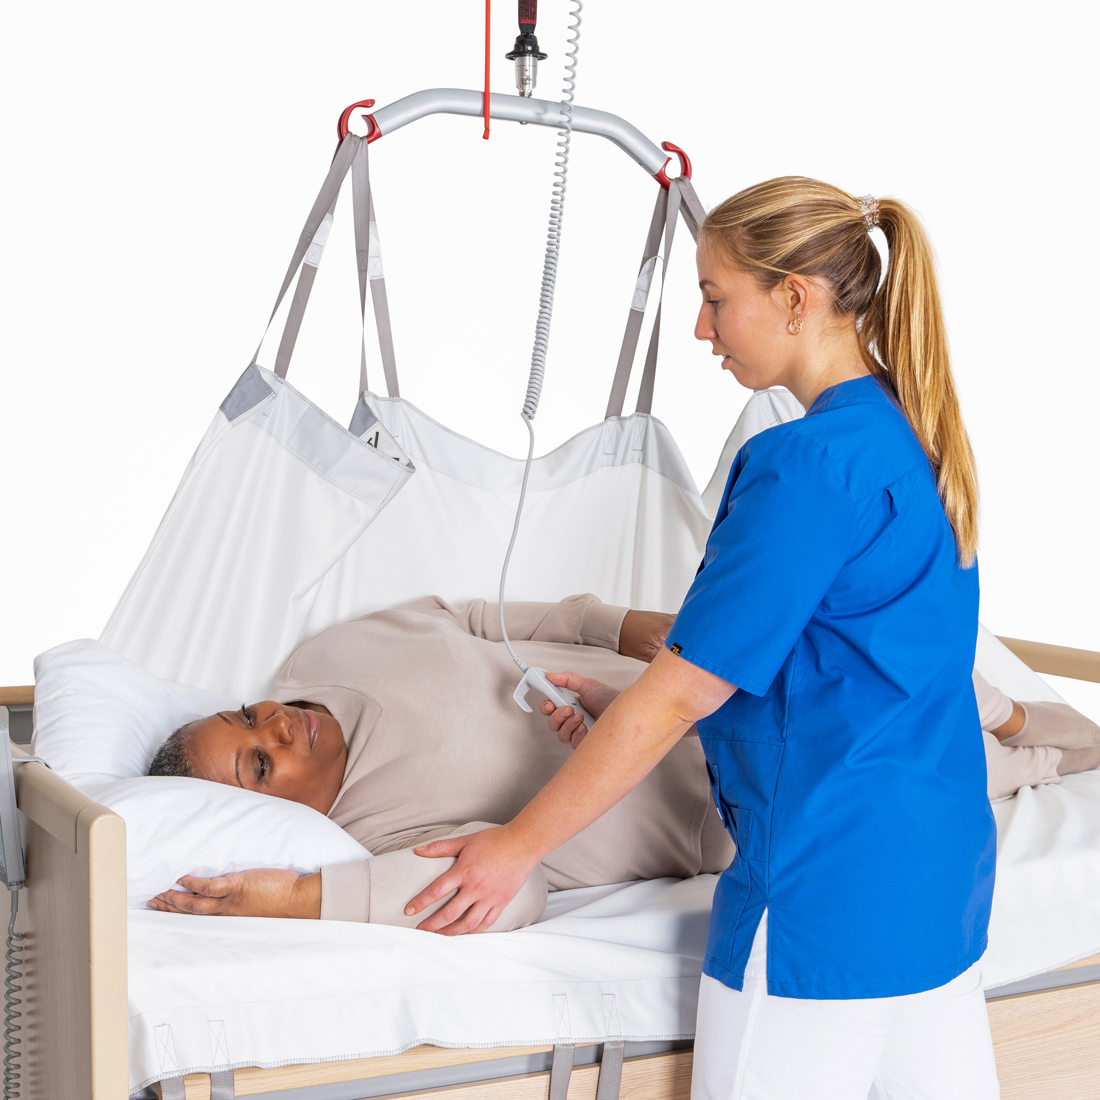 Molift UnoSling Repositioning Sheet Carer turning patient in bed.jpg